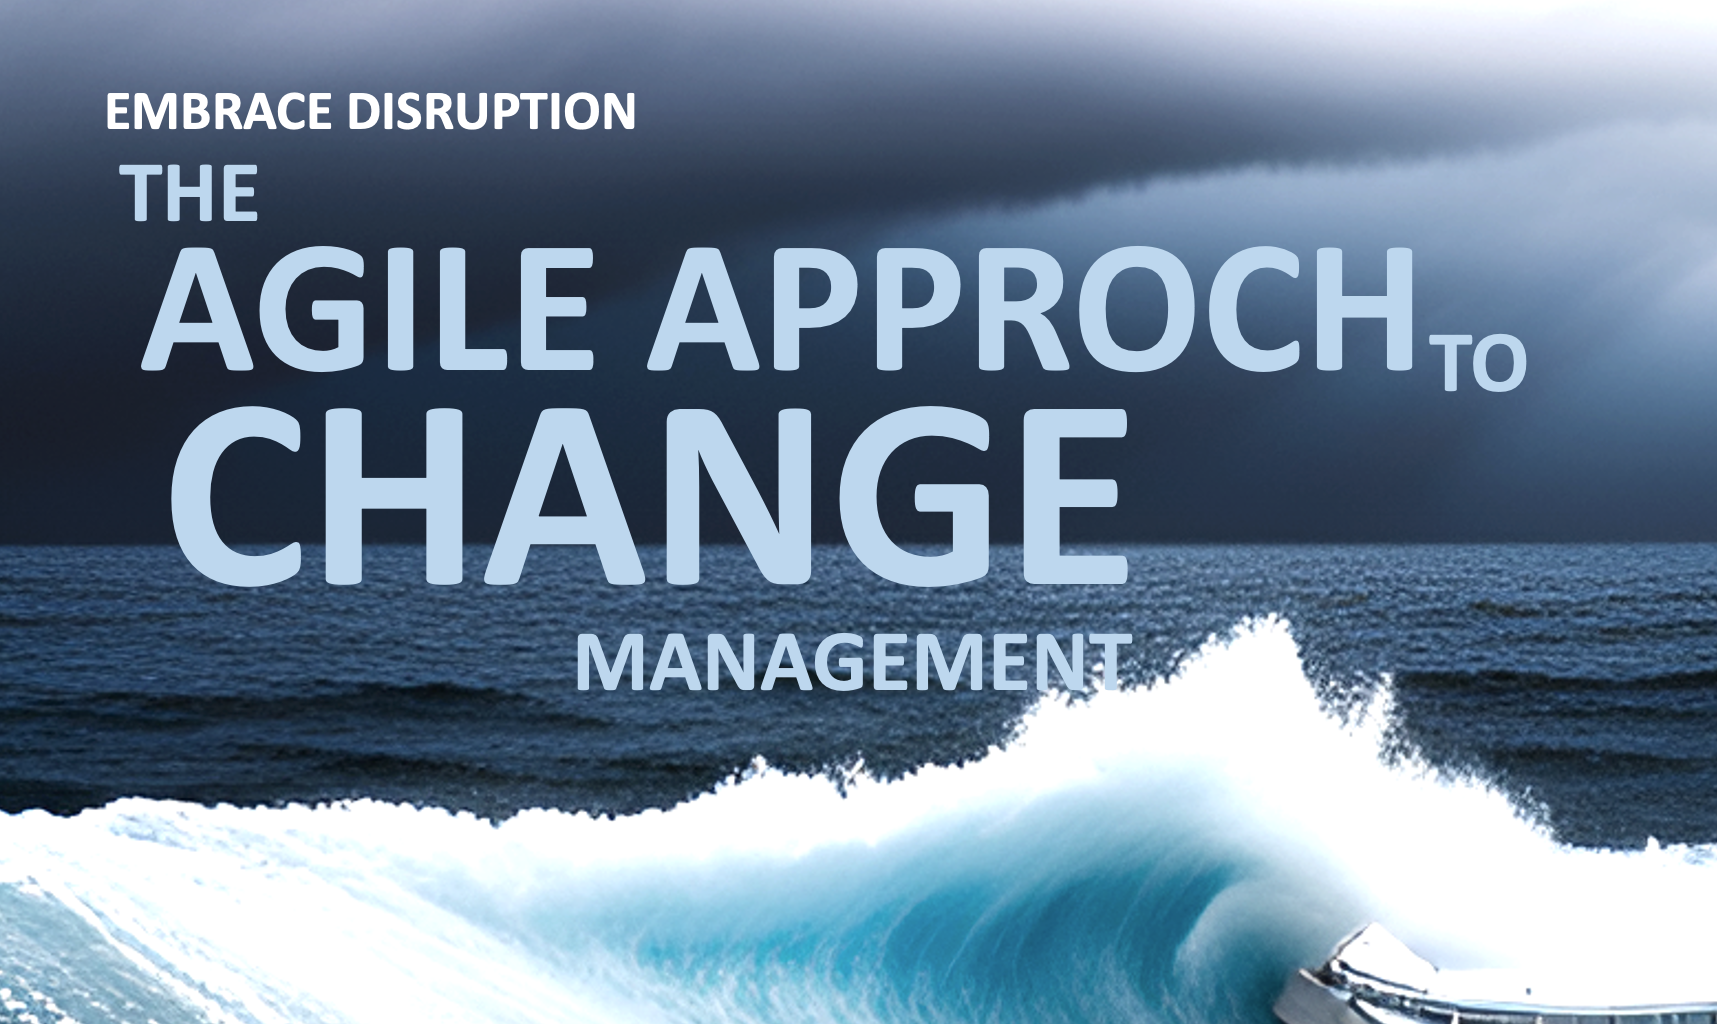 The Agile Approach to Change Management